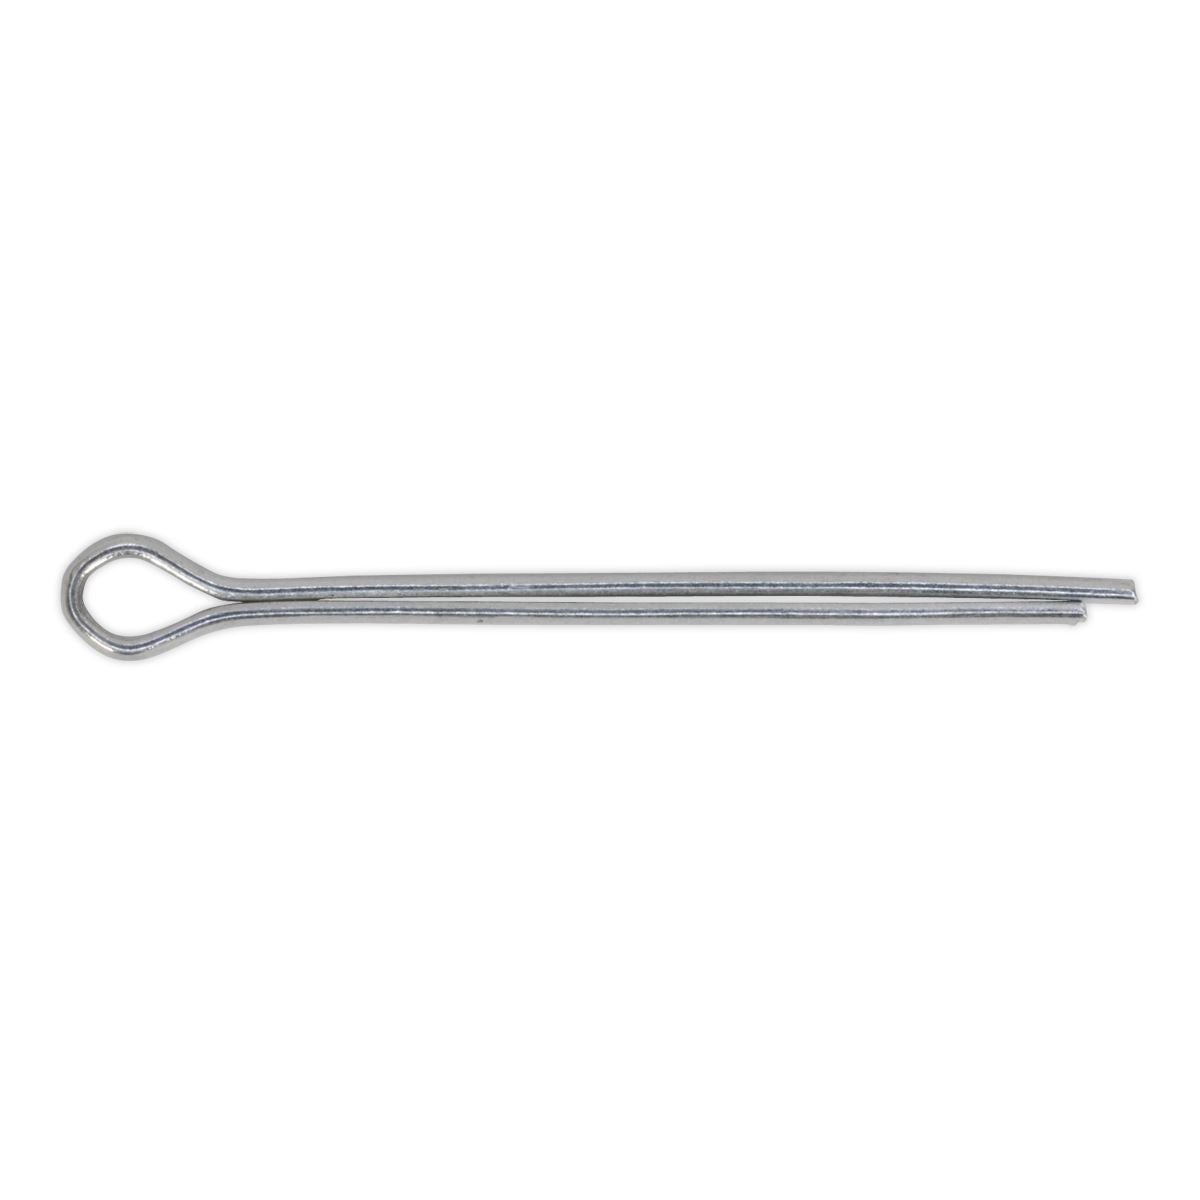 Sealey Split Pin 2.8 x 38mm Pack of 100